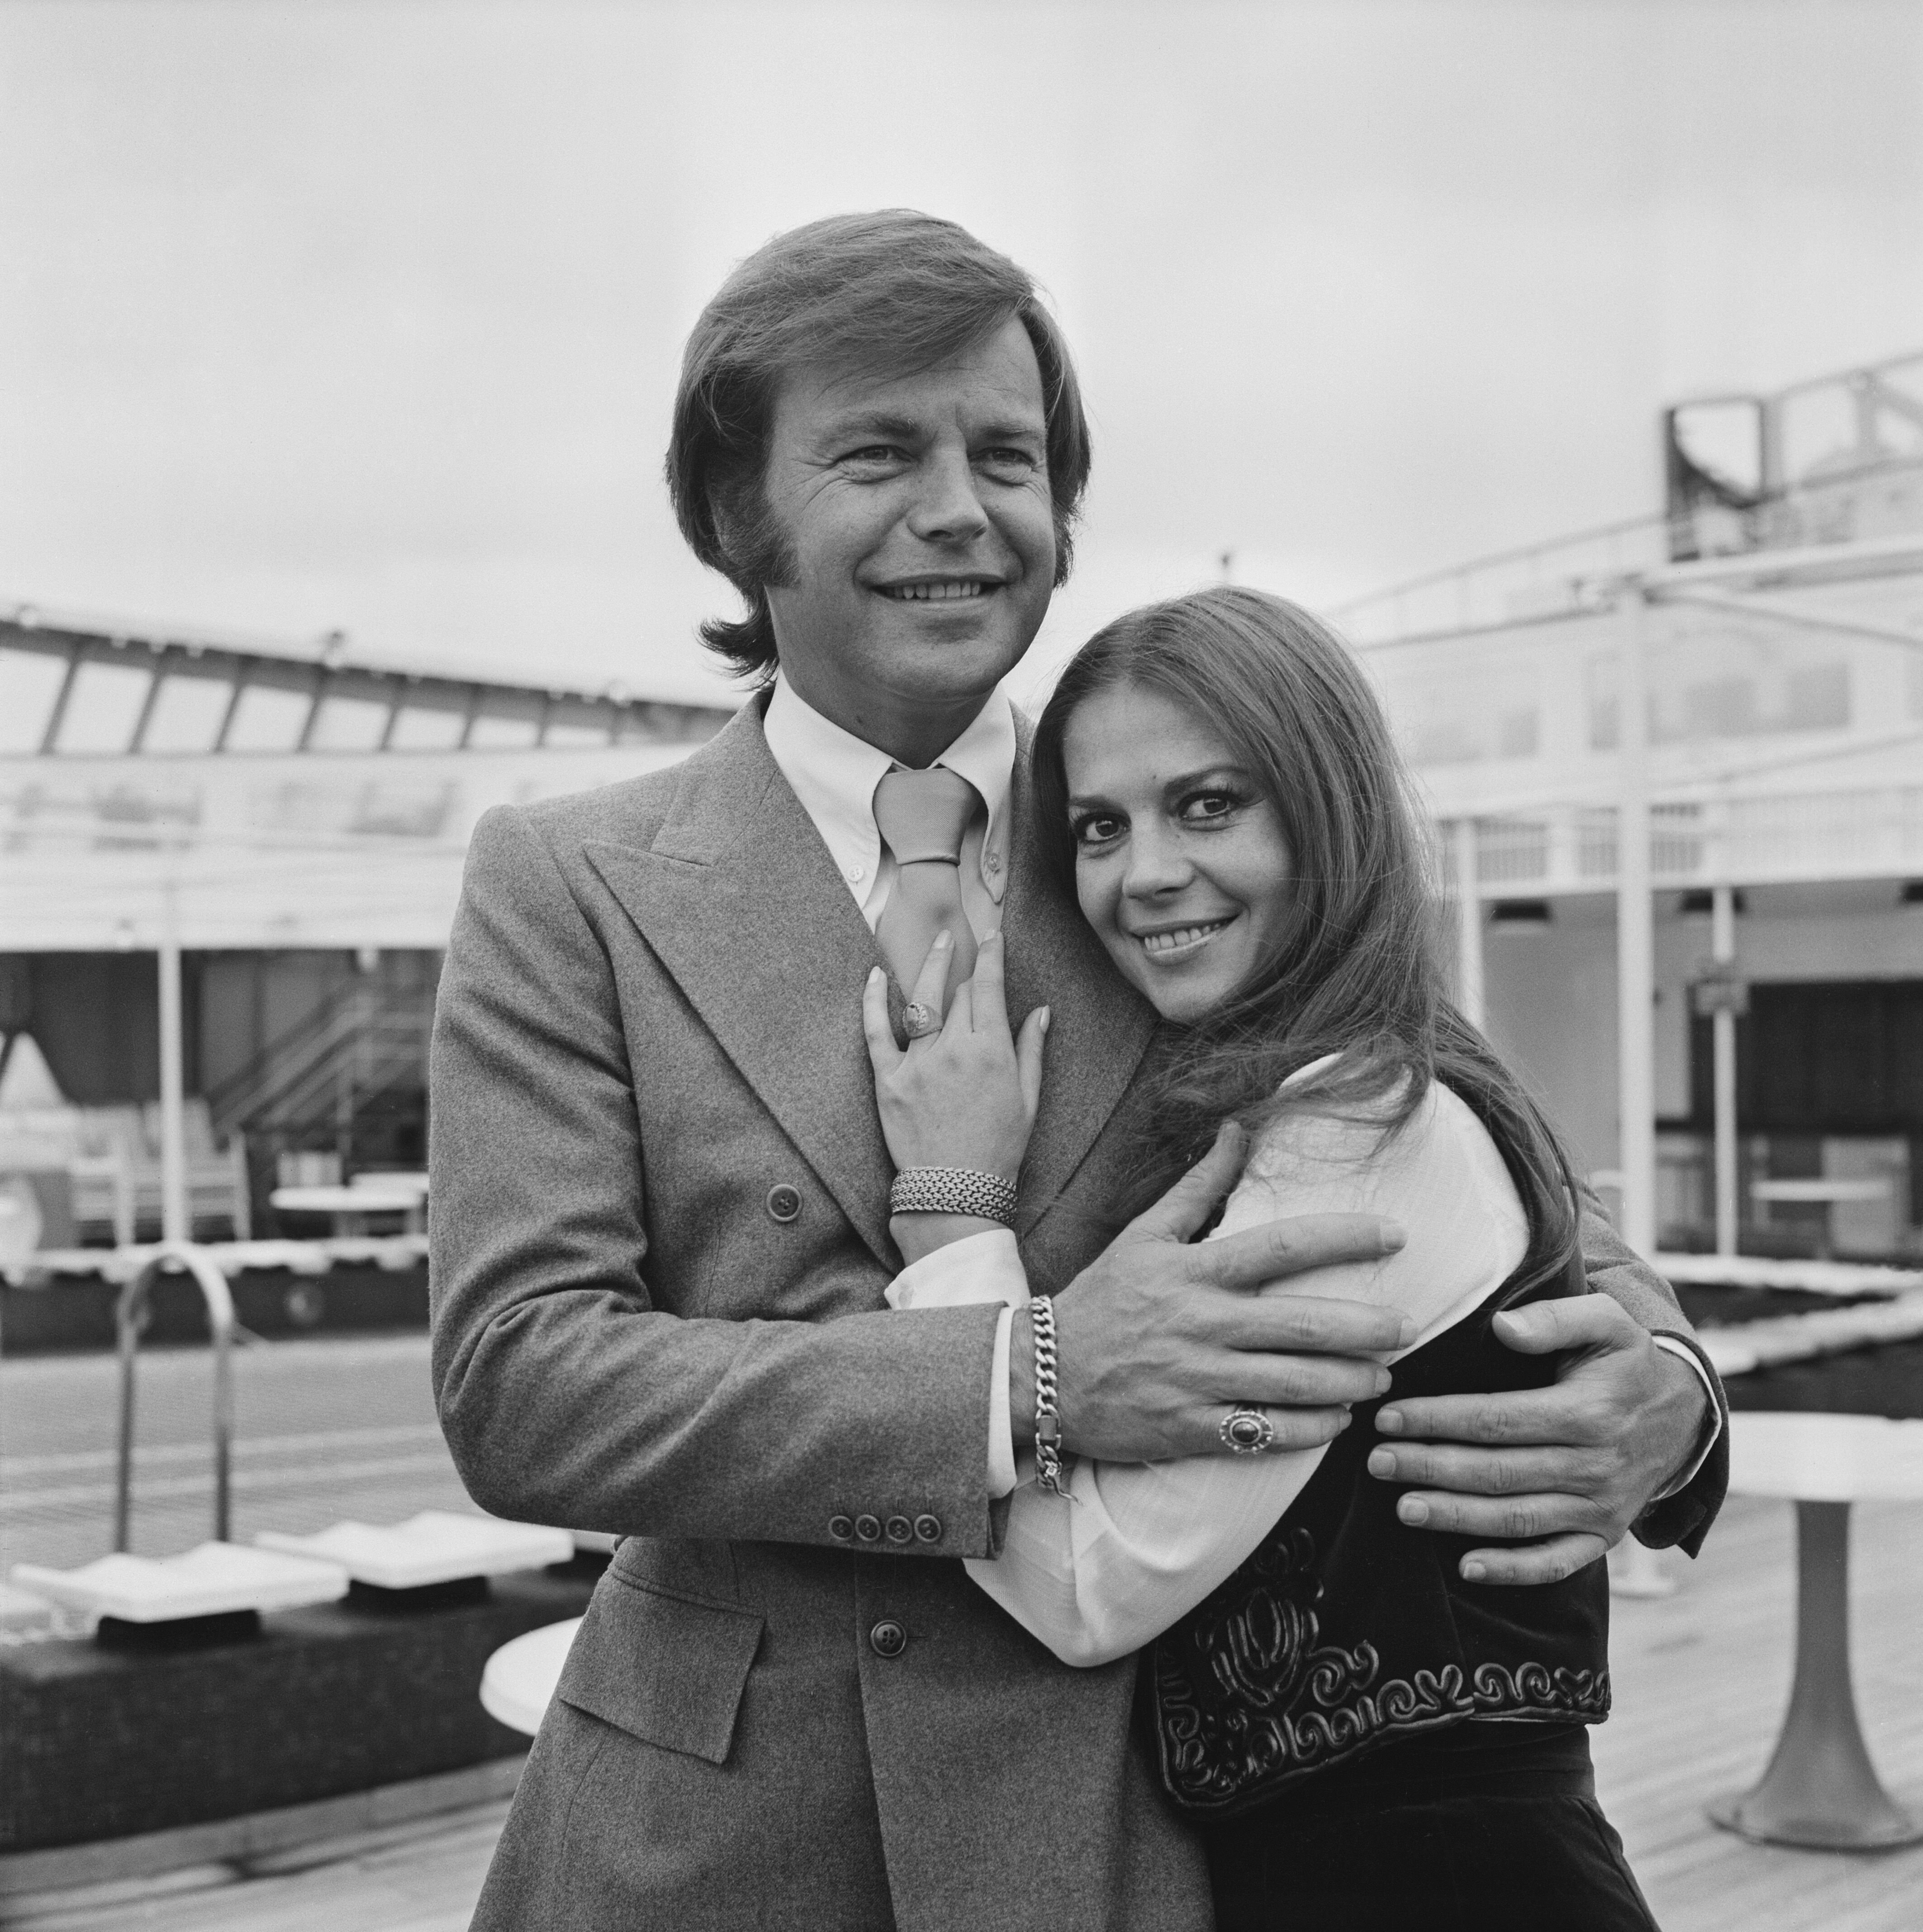 Robert Wagner with his former wife American actress Natalie Wood, 23rd April 1972. | Photo: Getty Images